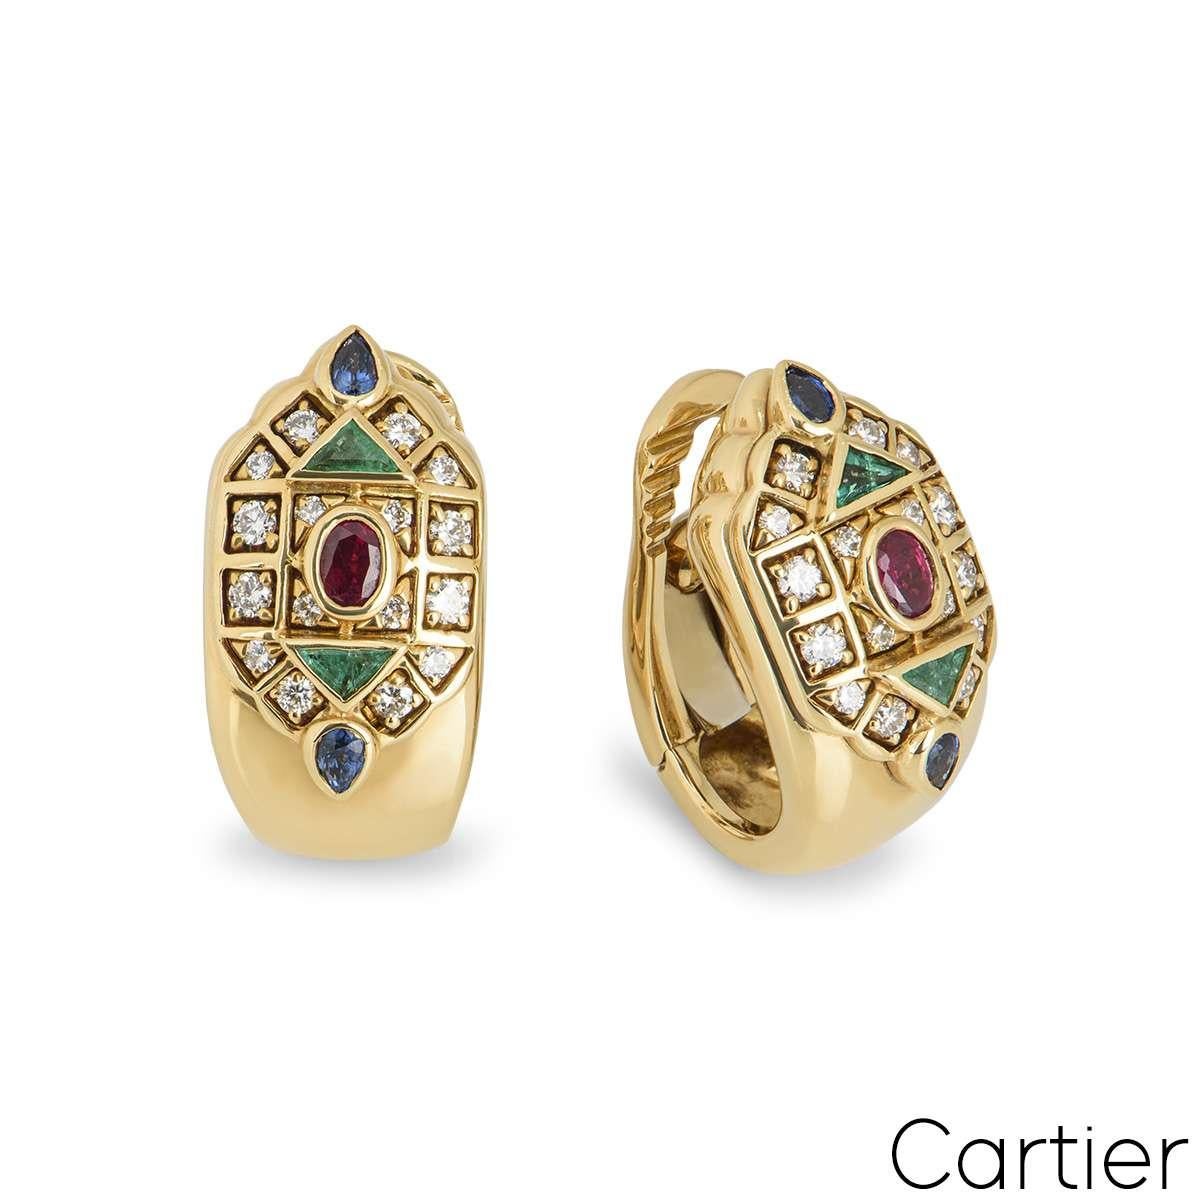 A pair of multi stone ear clips from the Cartier Byzantine collection. The front of the ear clip is set with a geometric mosaic of round brilliant cut diamonds, triangular emeralds, pear shape sapphires and oval rubies. Signed Cartier with the